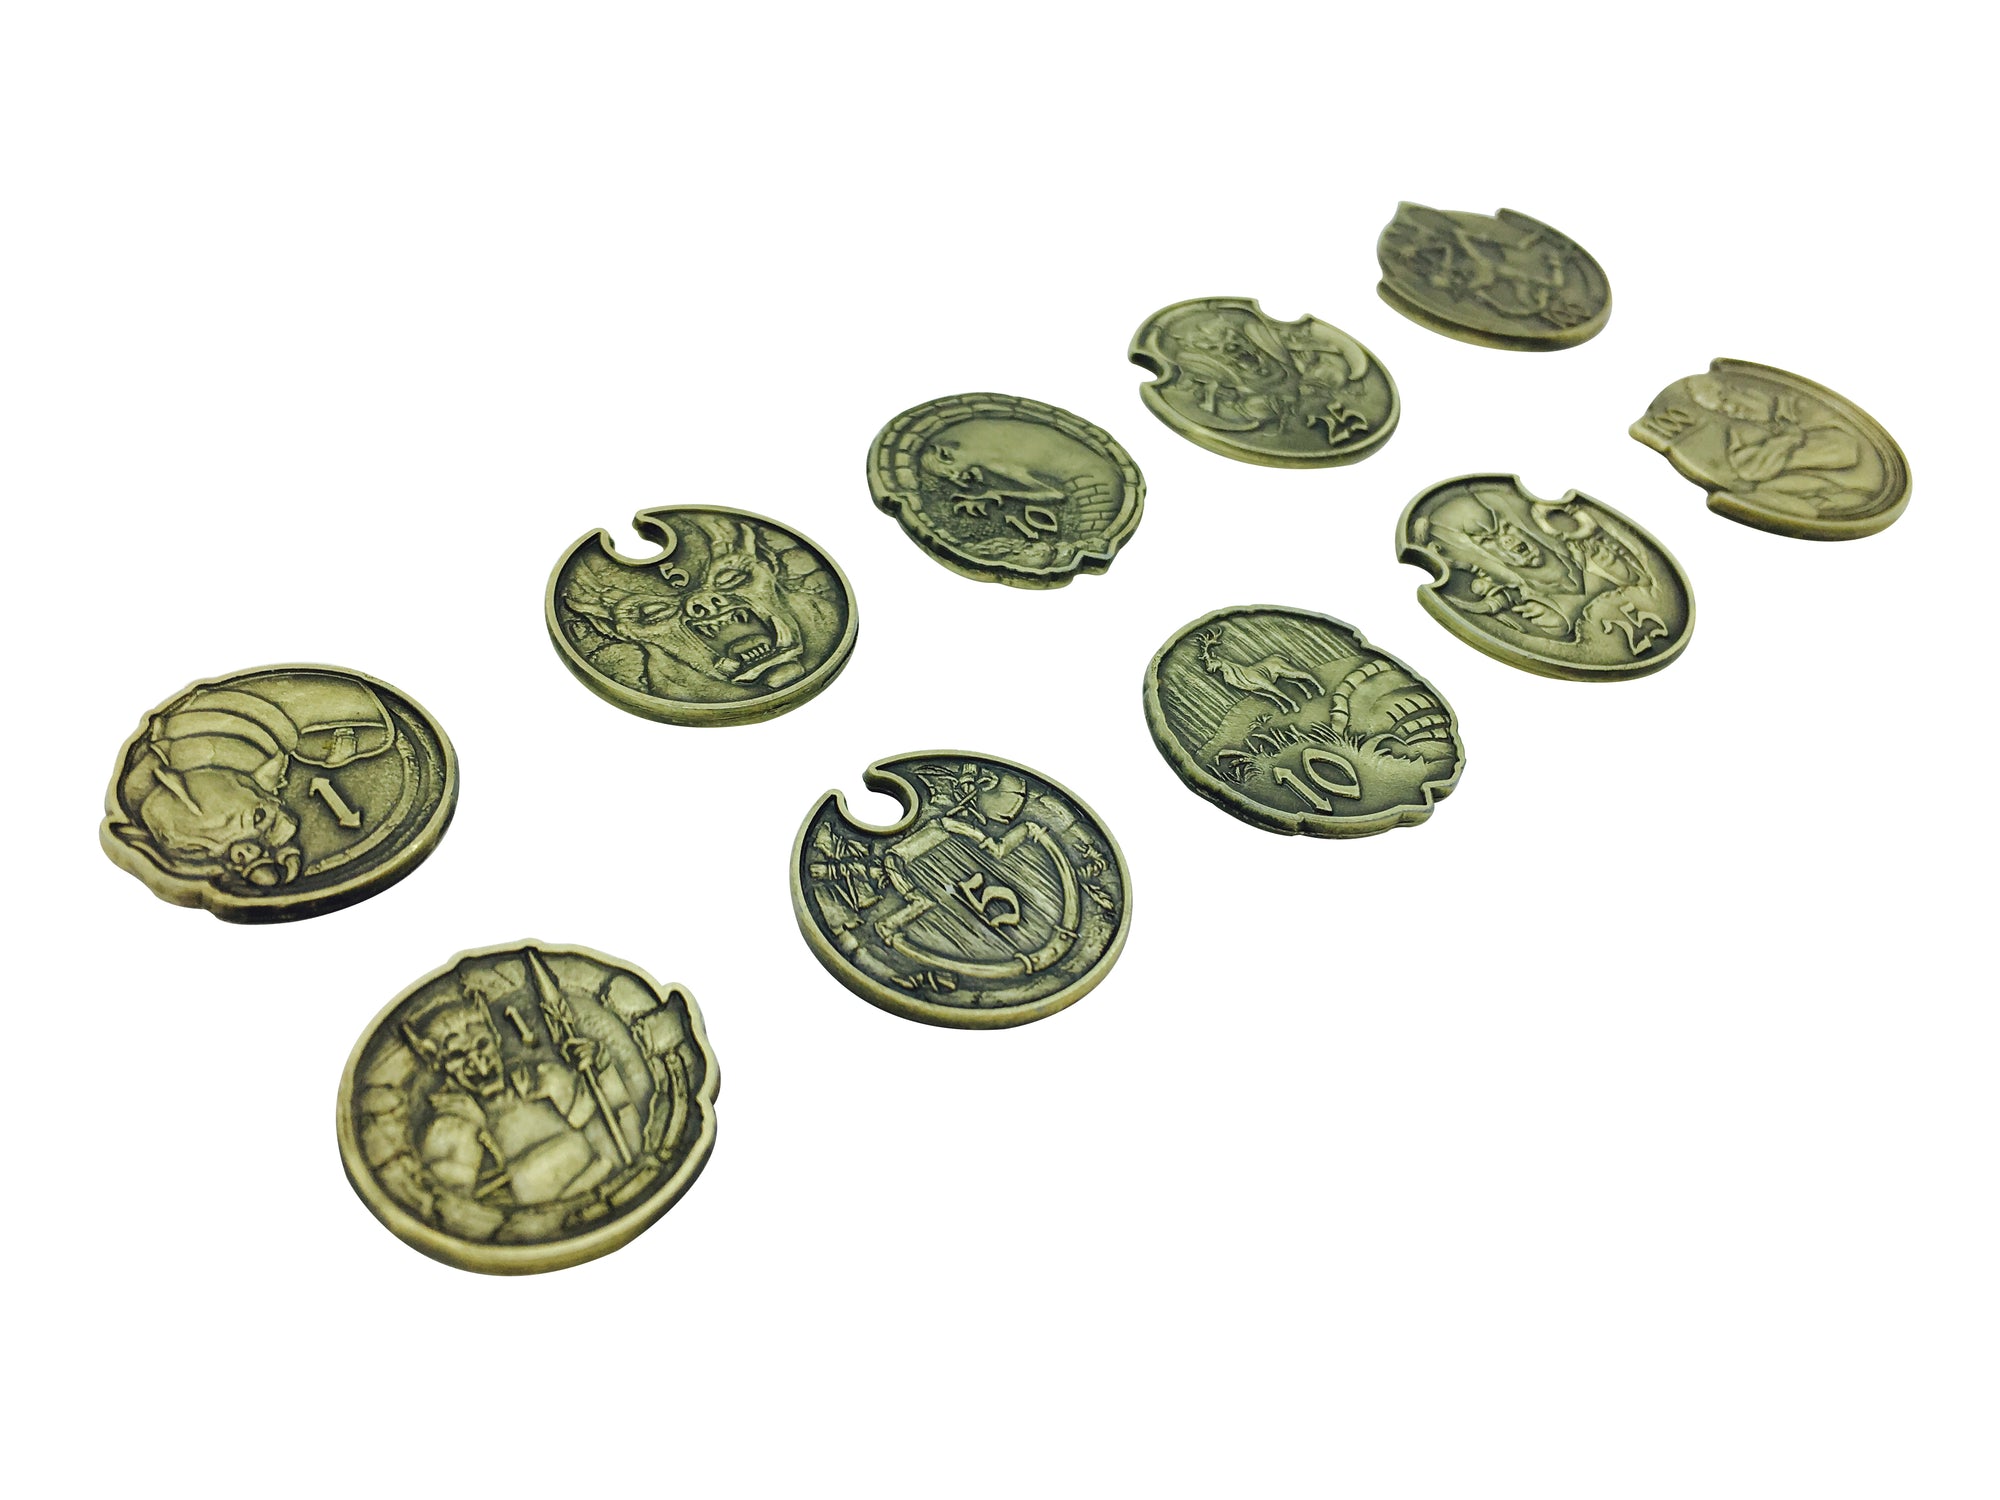 Adventure Coins – Orc and Goblins Metal Coins Set of 10